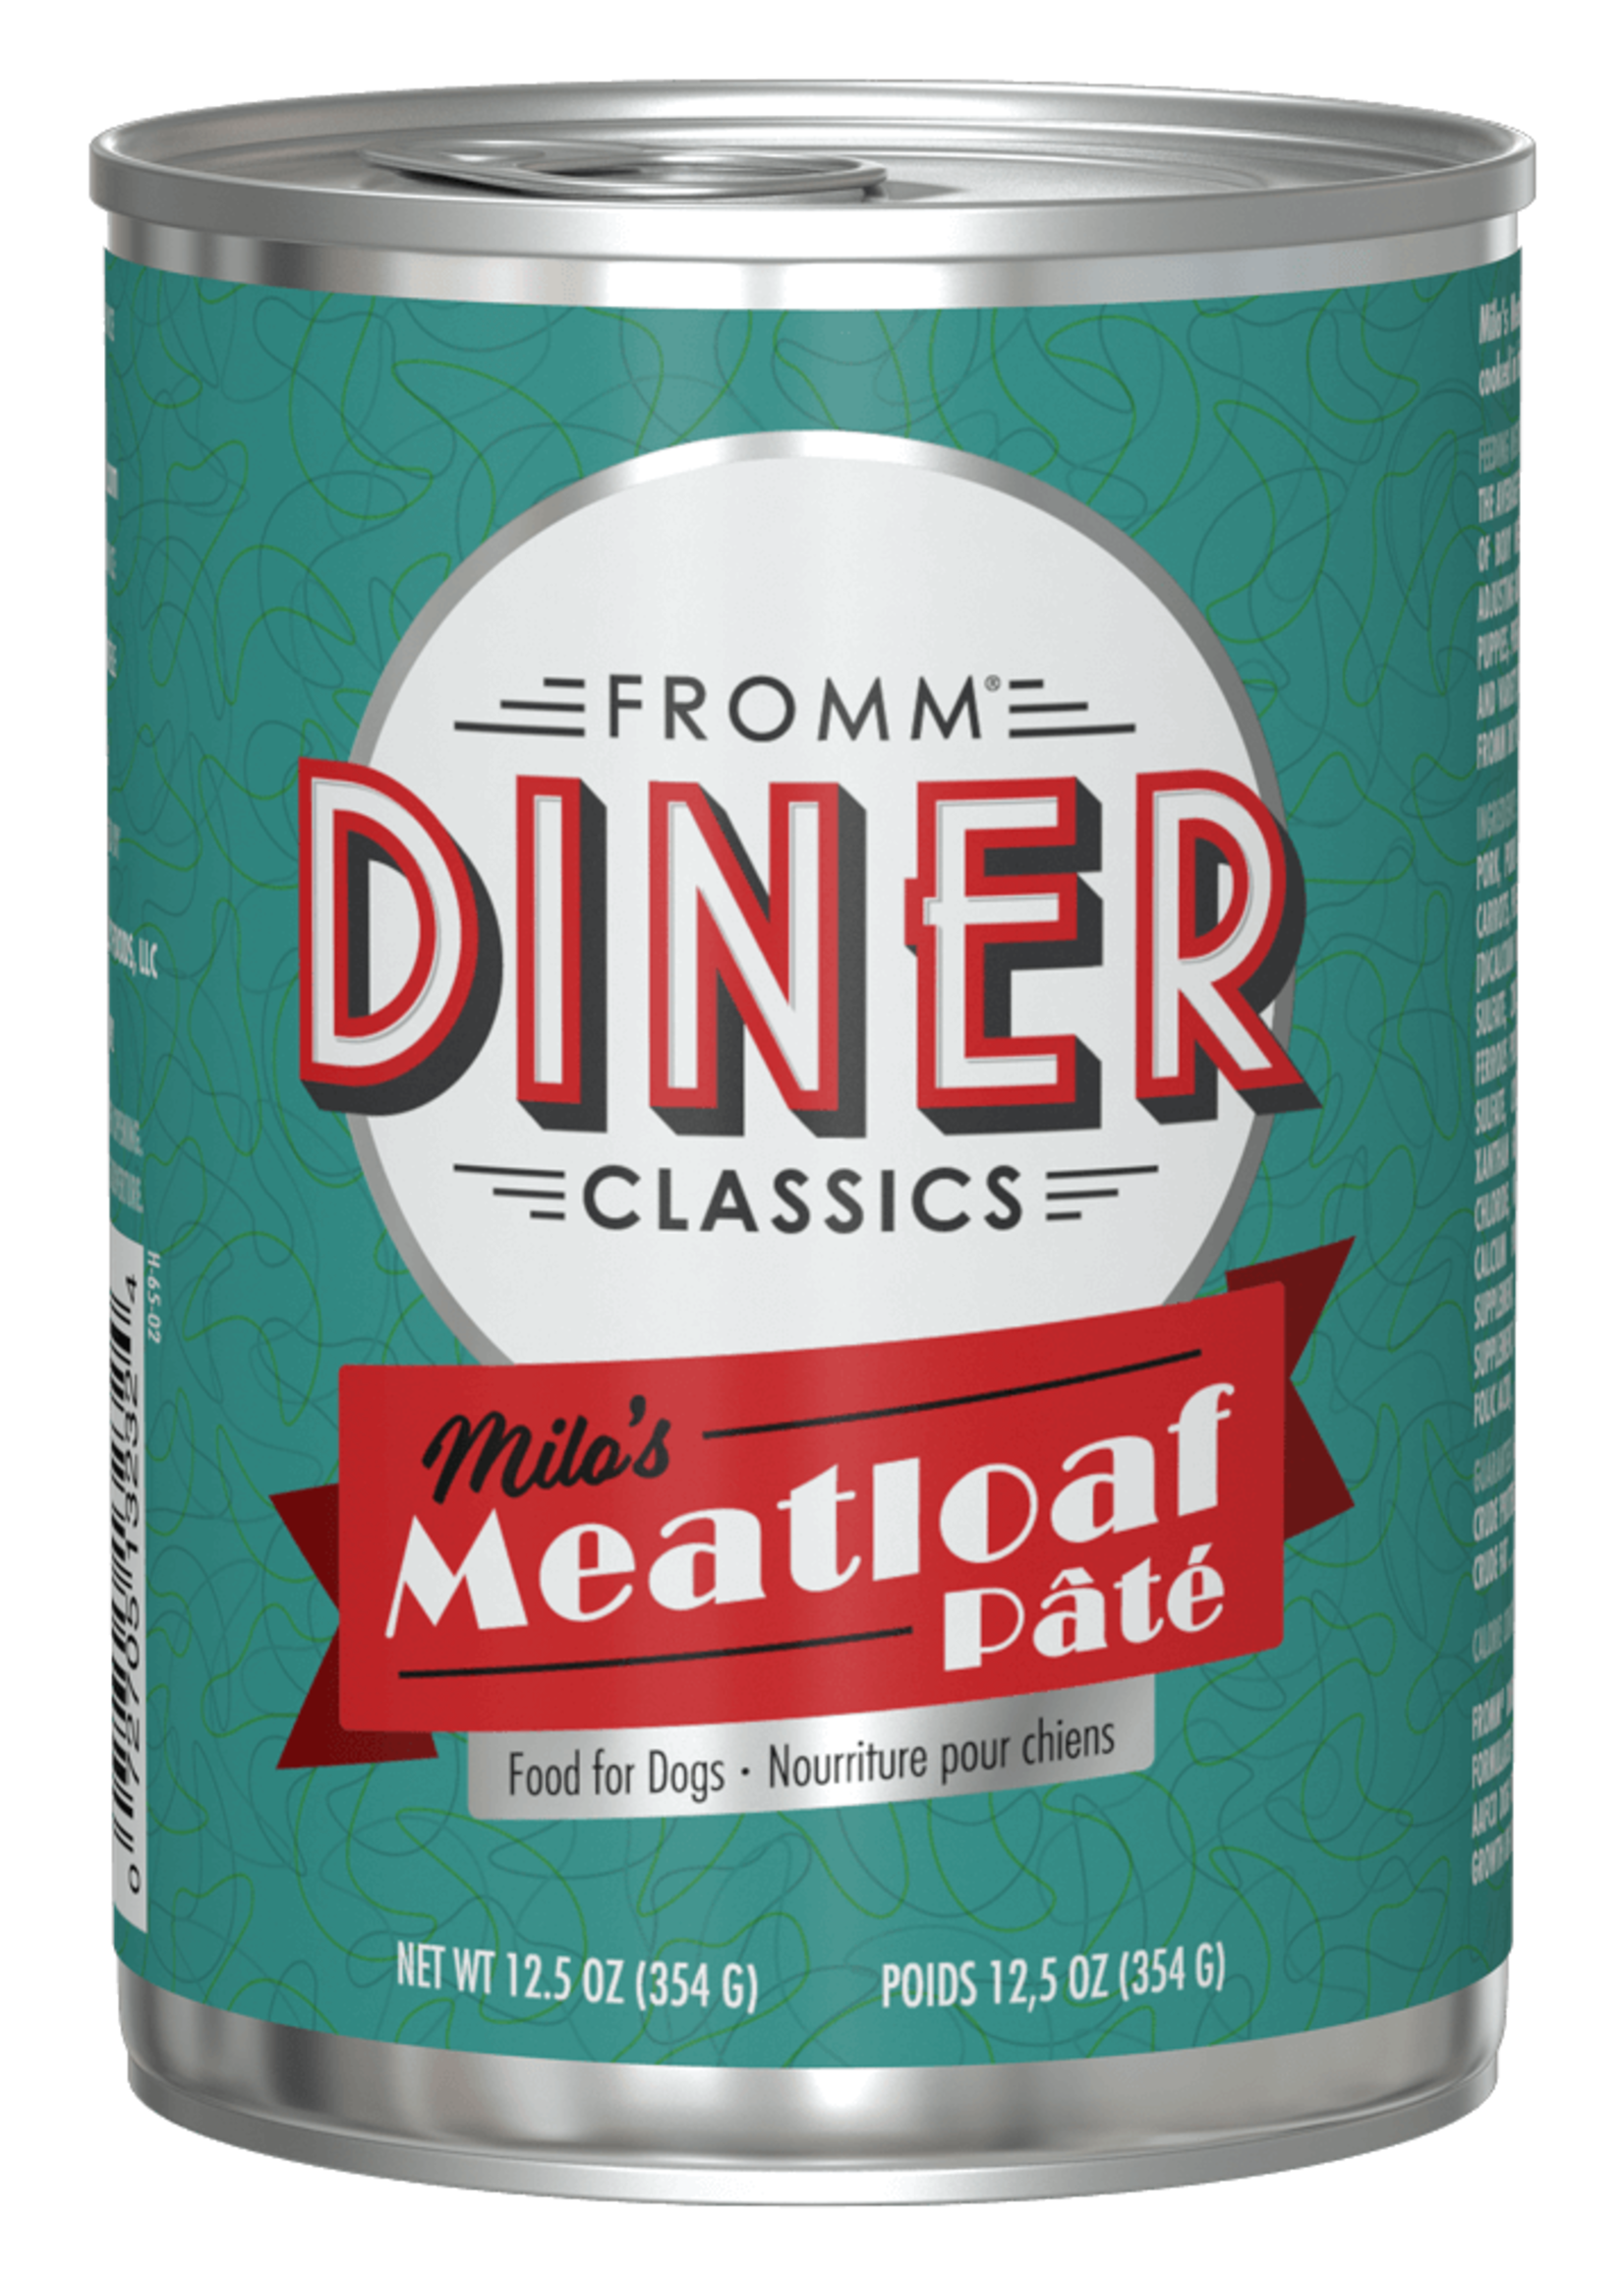 Fromm Family Pet Food Fromm Dog Diner Classics Milo's Meatloaf Pate 12.5 oz single